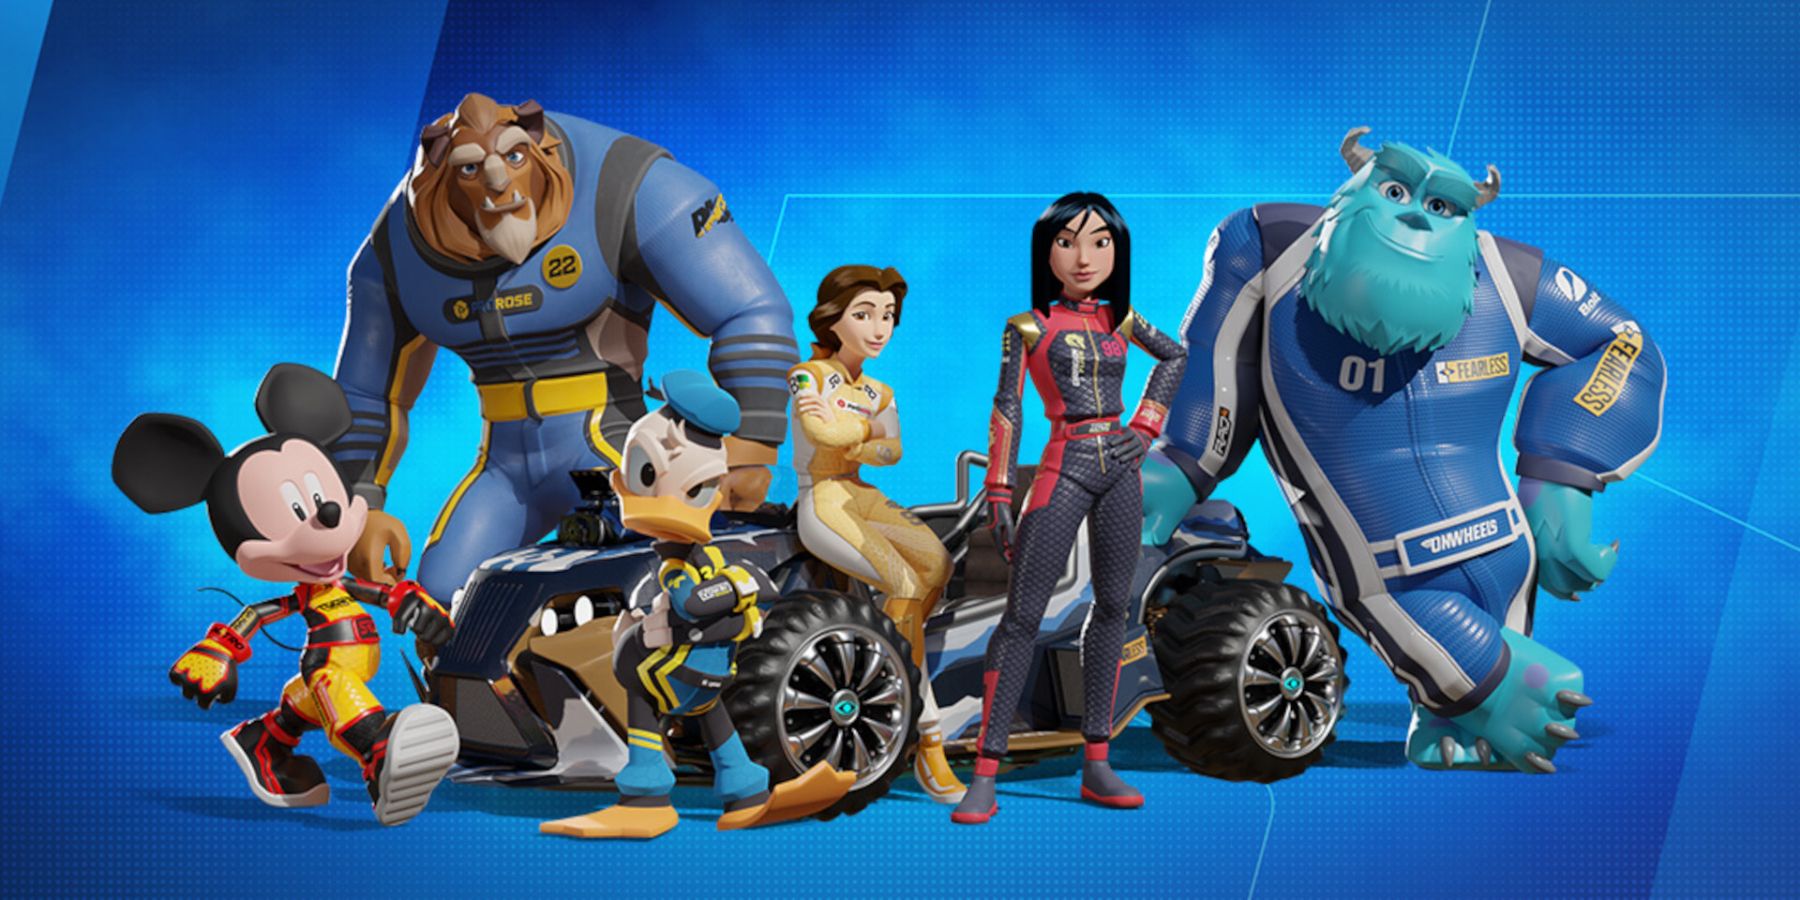 Five characters from Disney Speestorm - Mickey, Donald, Mulan, Sulley, Bell, and the Beast - posing around a race car.